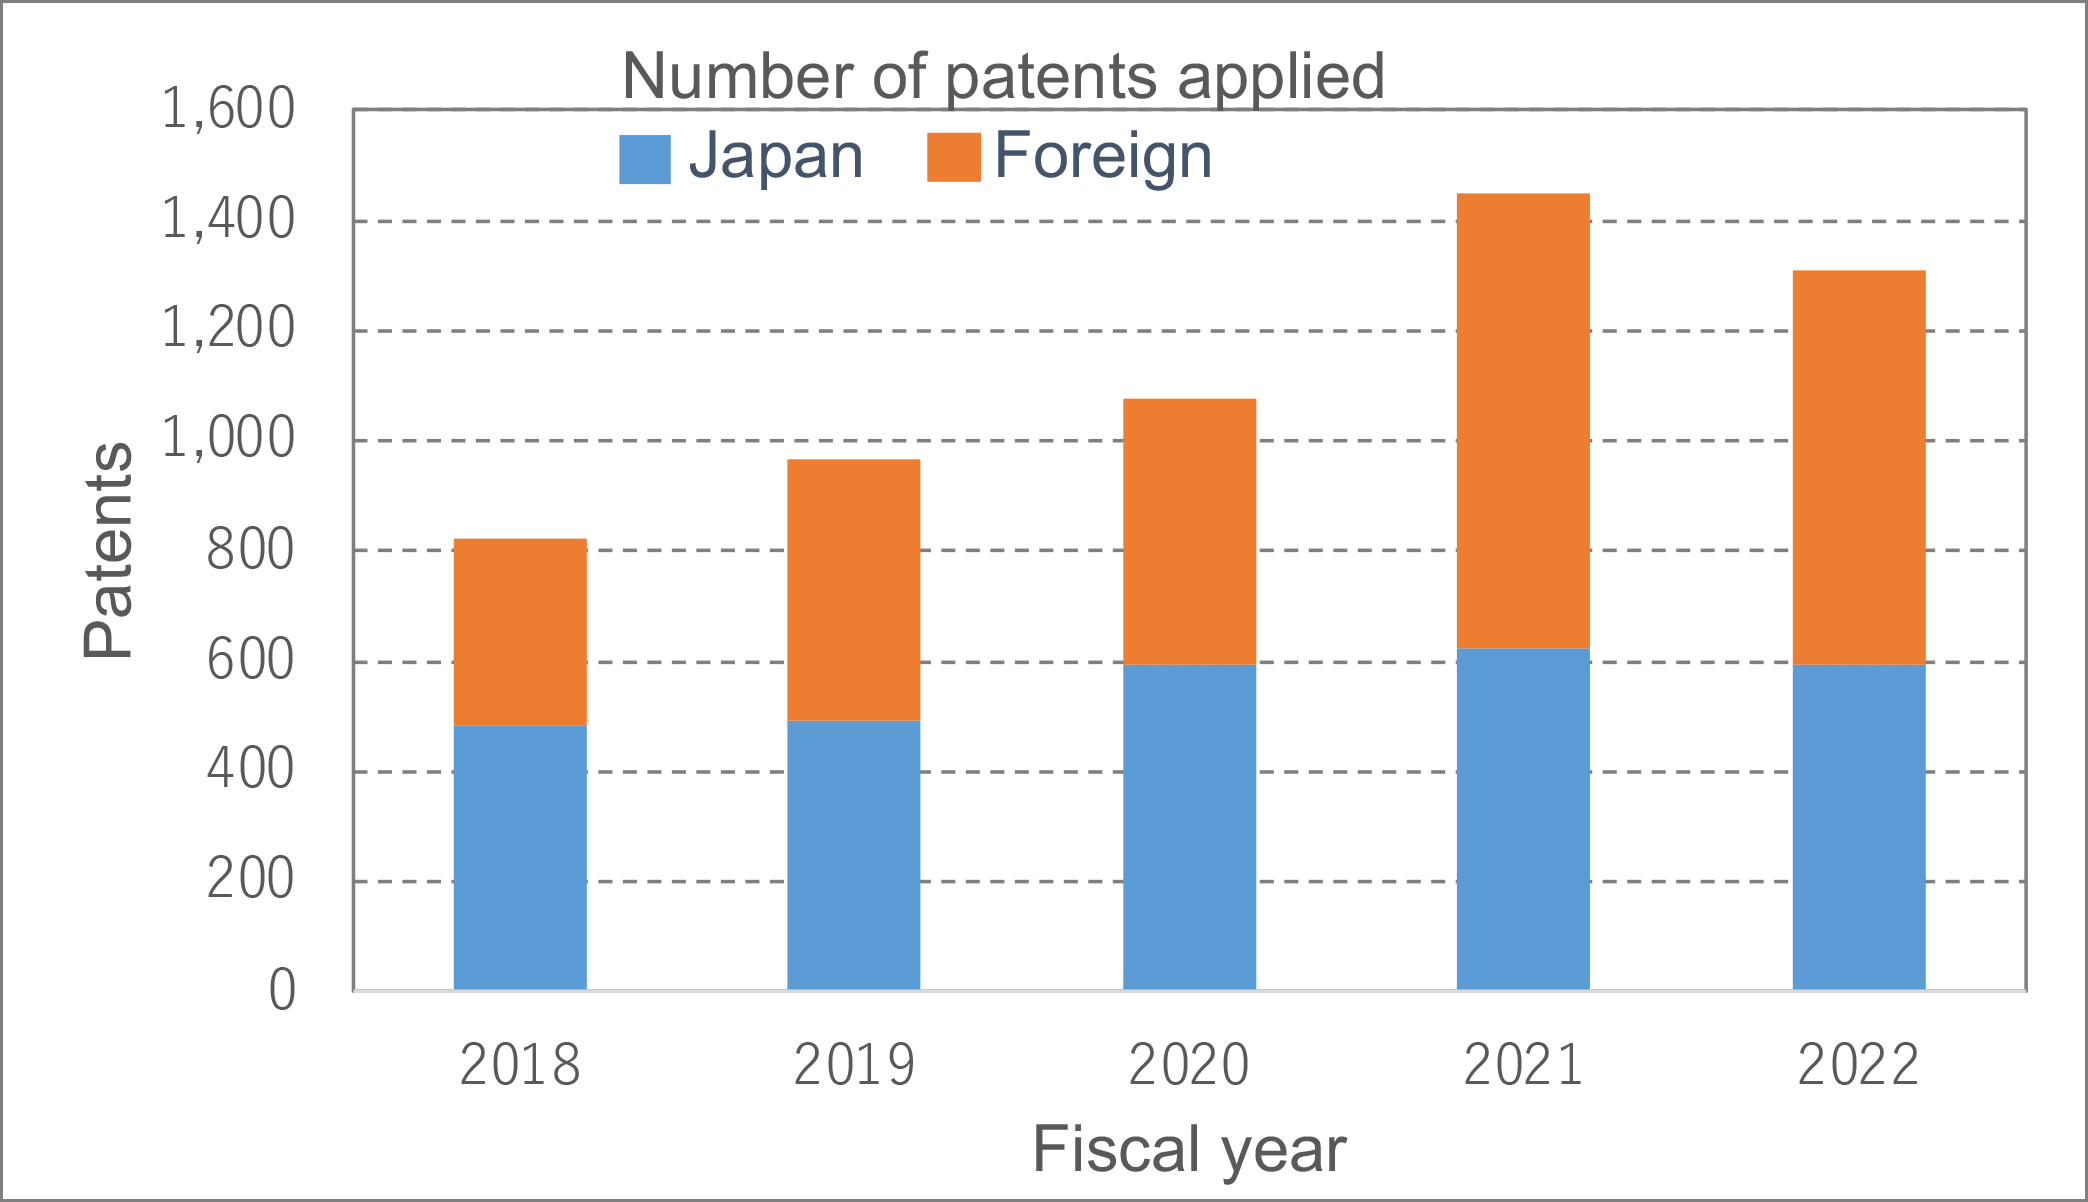 Number of patents applied